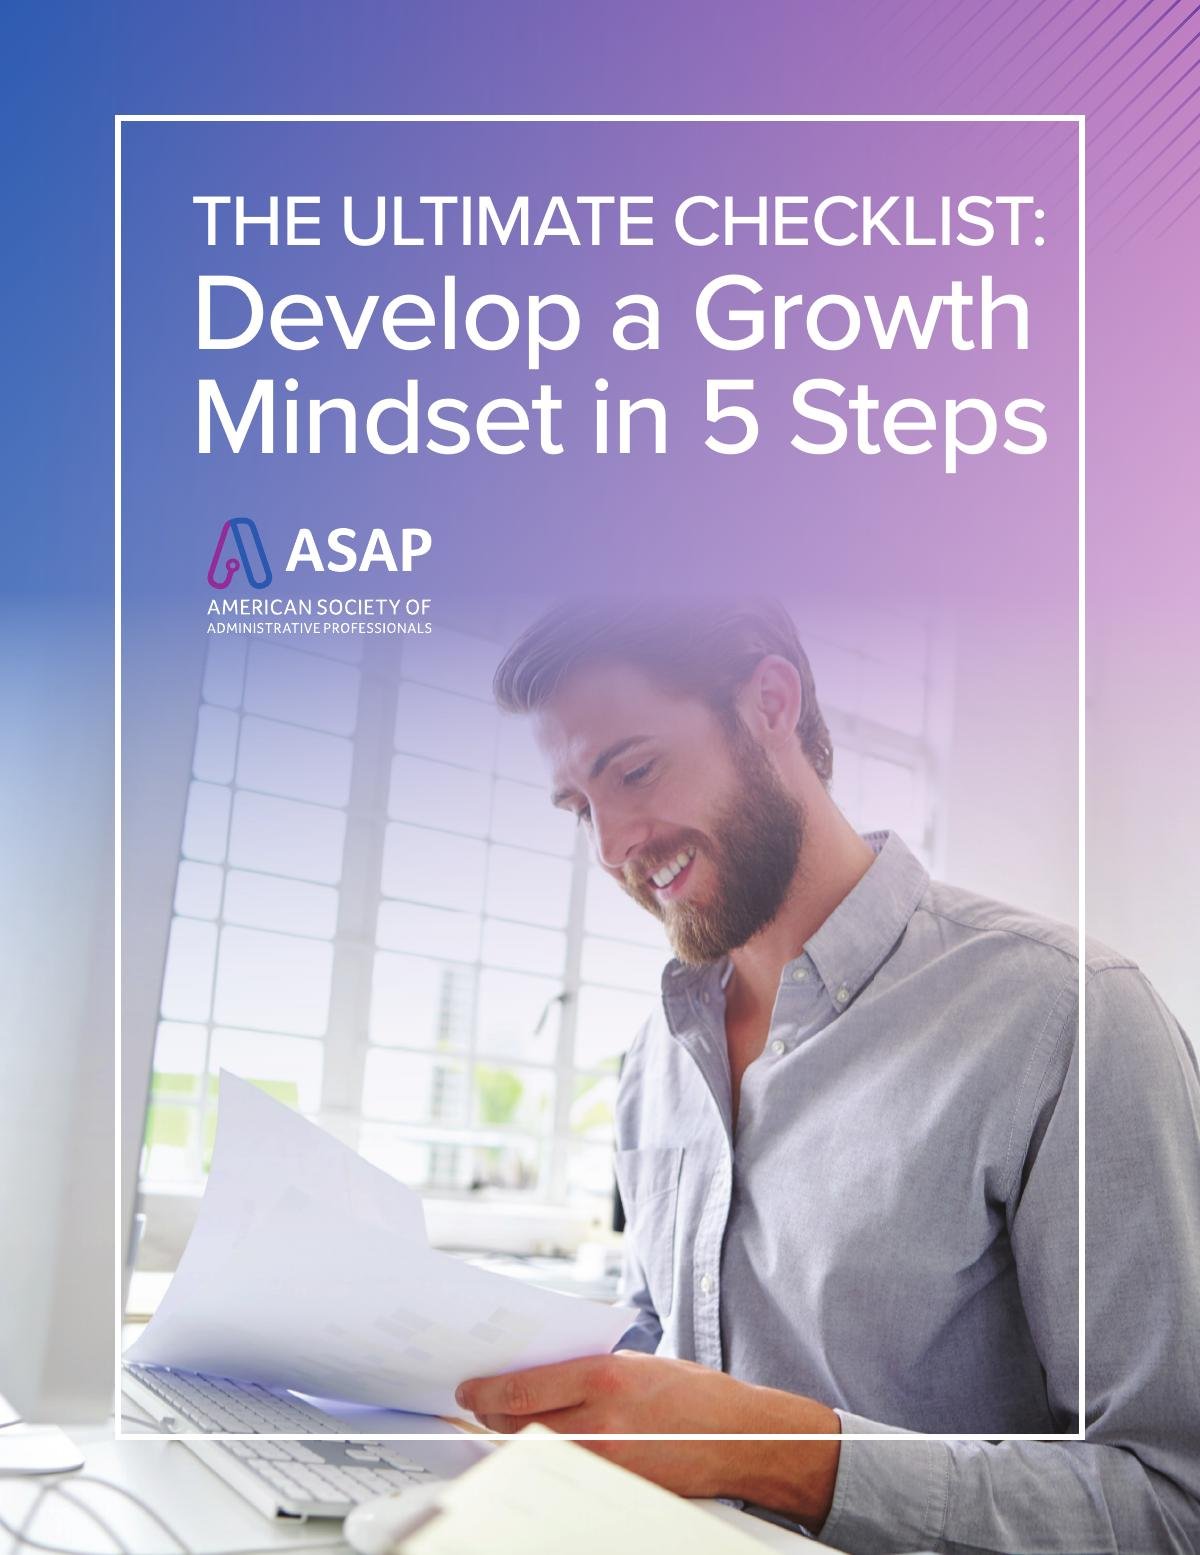 THE ULTIMATE CHECKLIST: Develop a Growth Mindset in 5 Steps